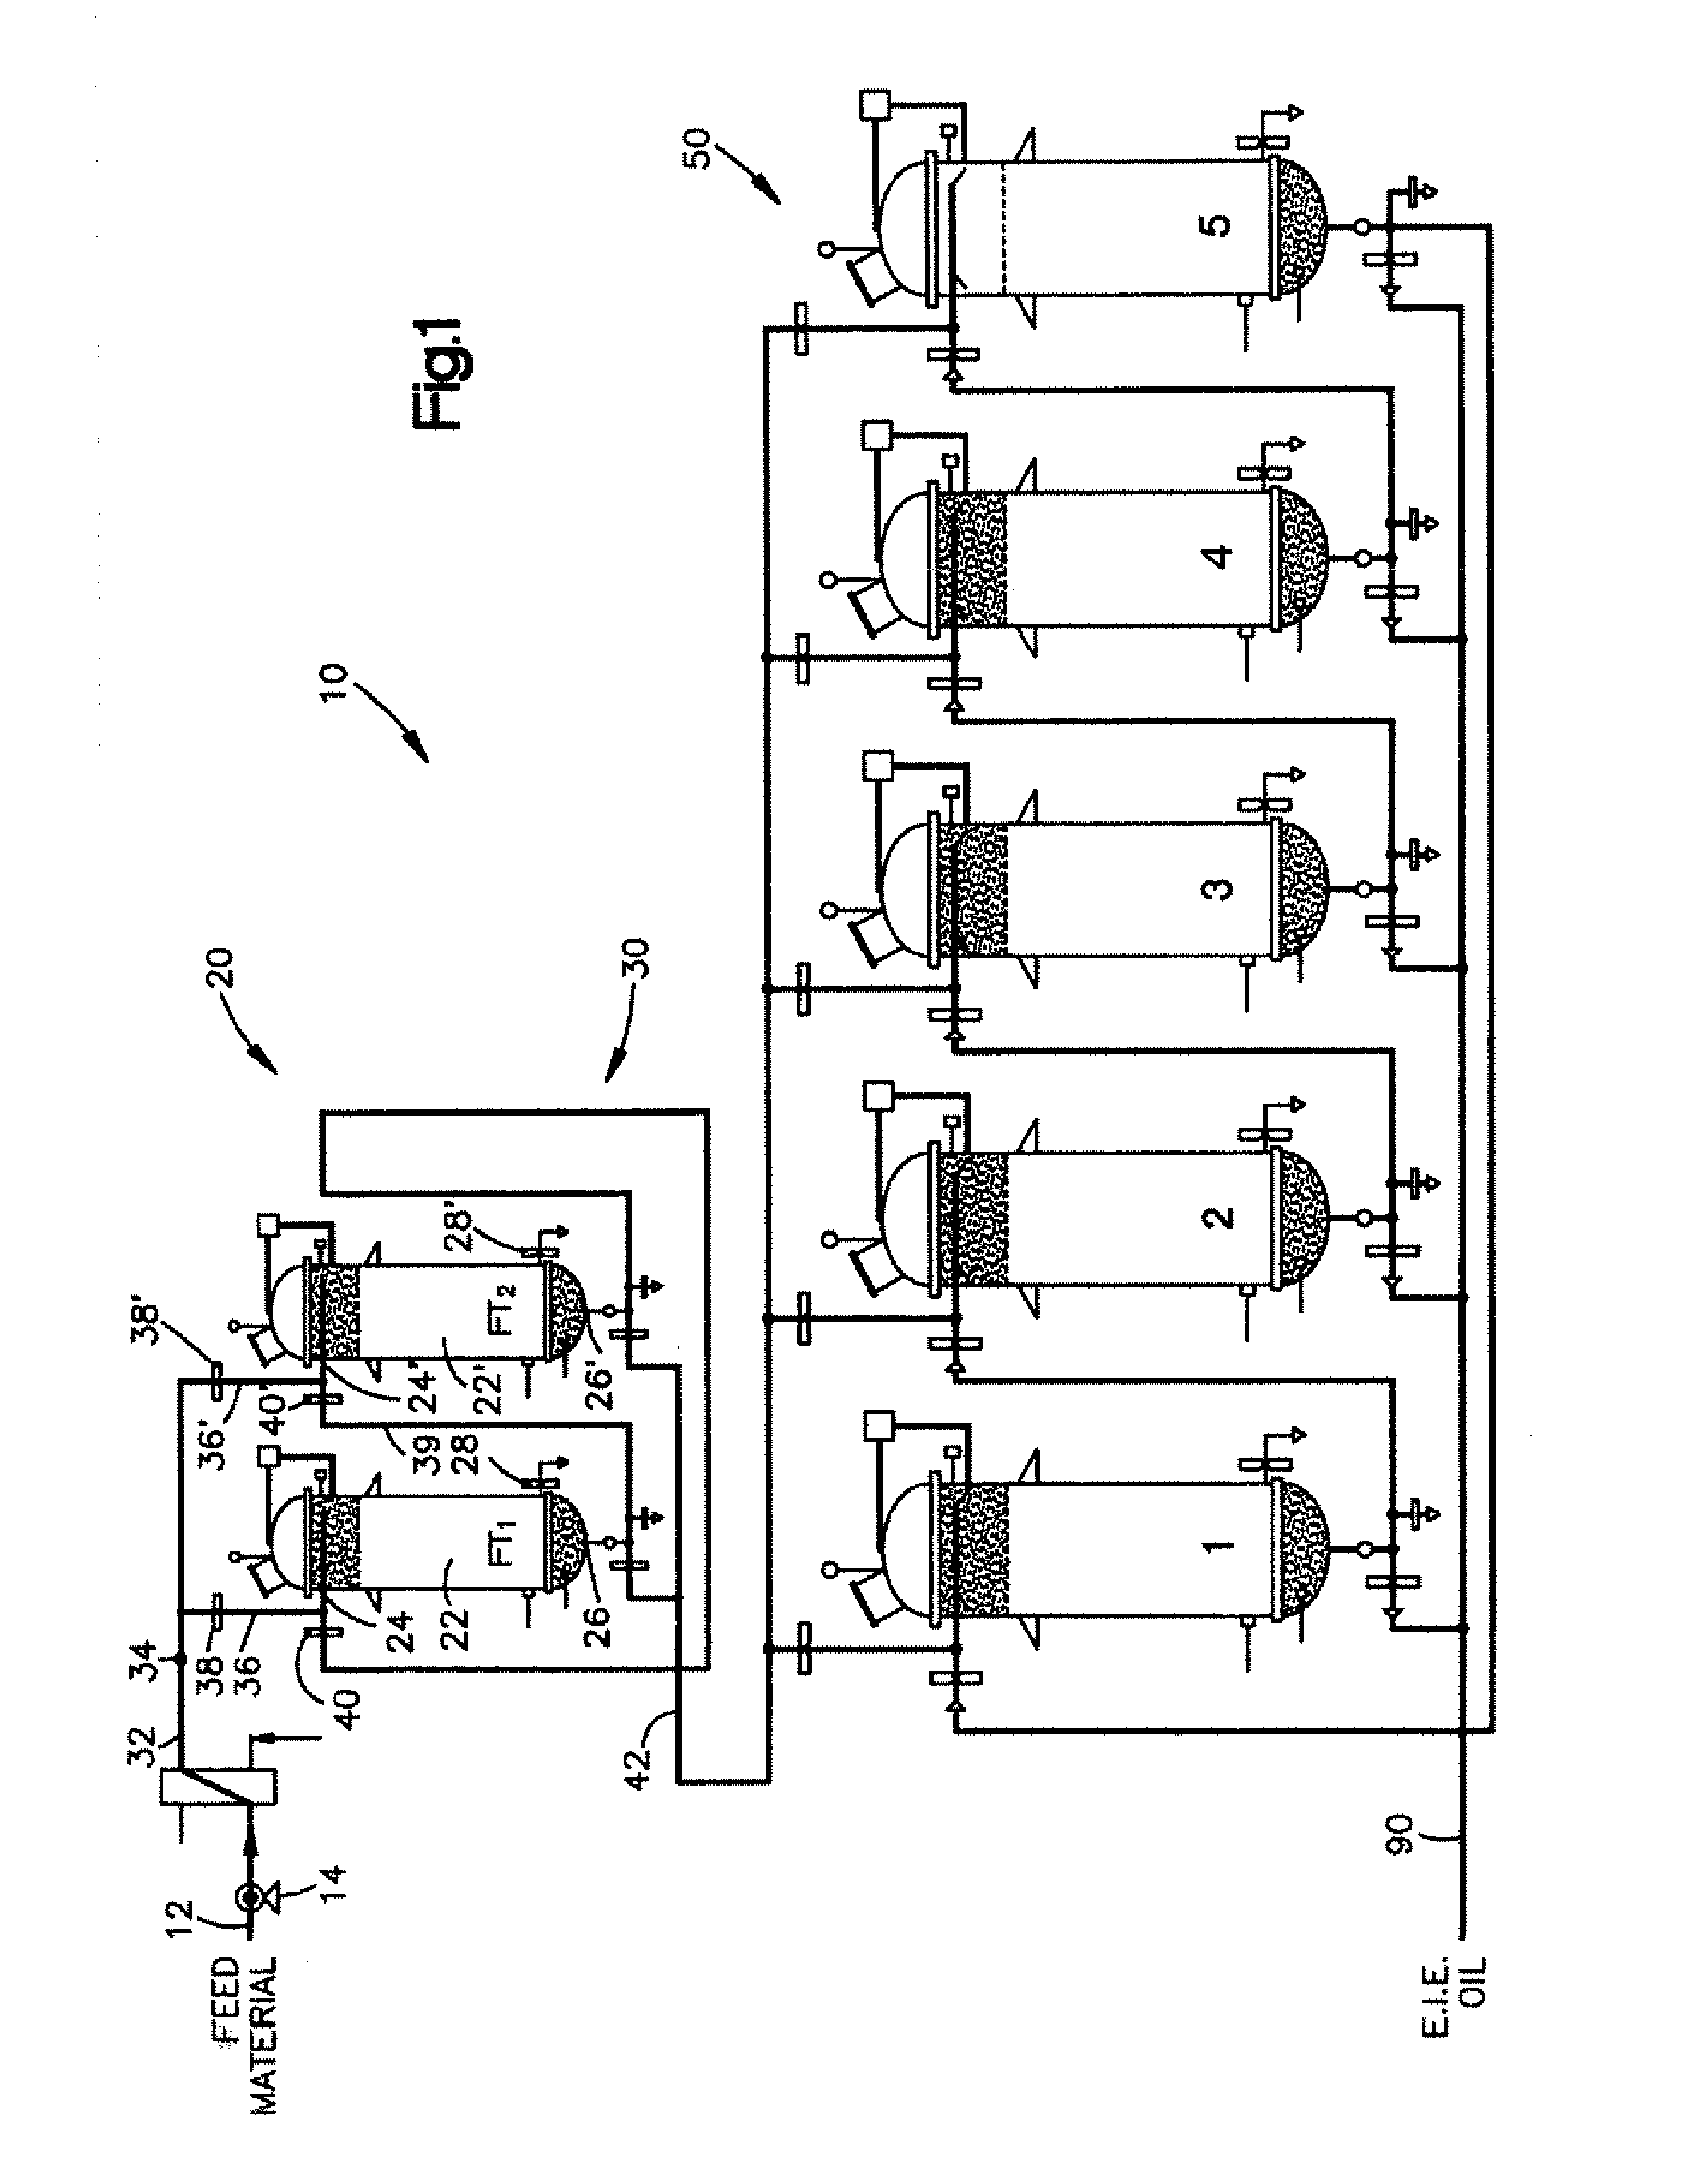 Continuous process and apparatus for enzymatic treatment of lipids